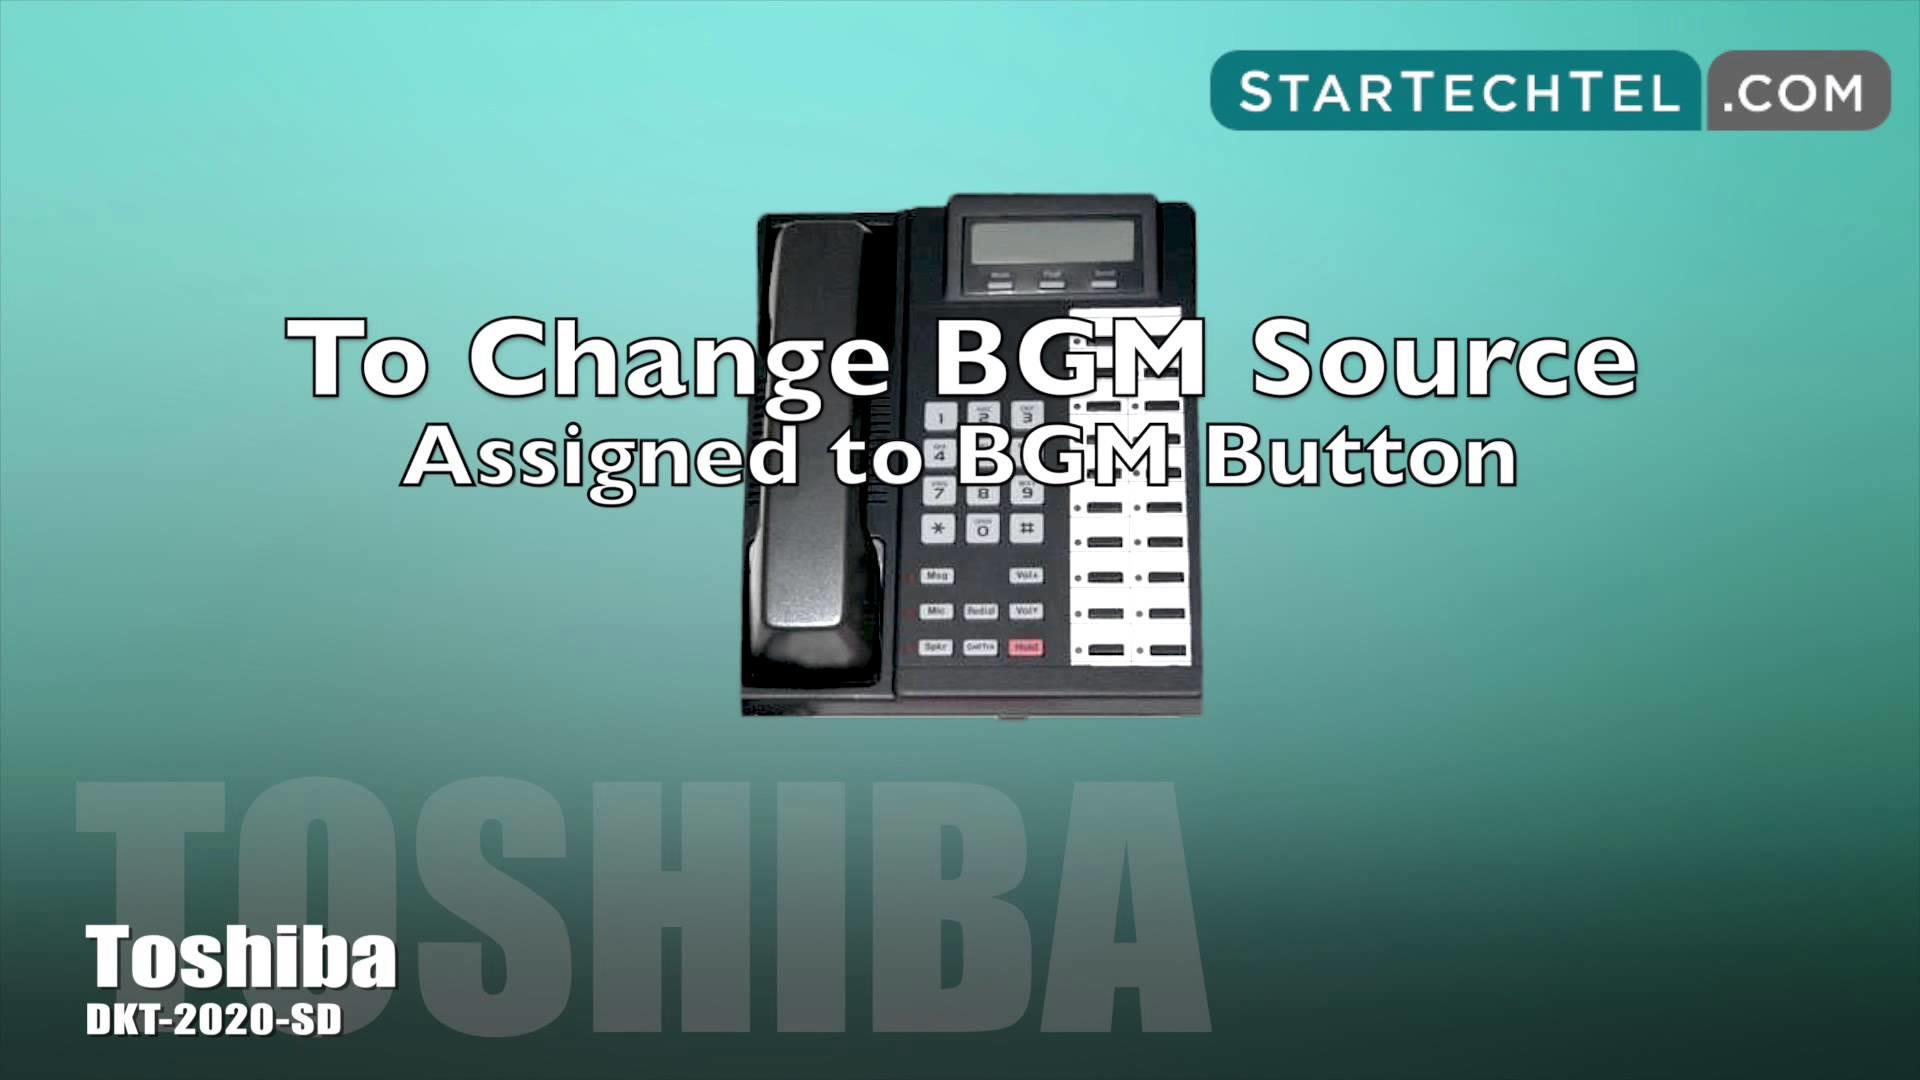 1920x1080 How To Change The Background Music On The Toshiba DKT-2020-SD Phone